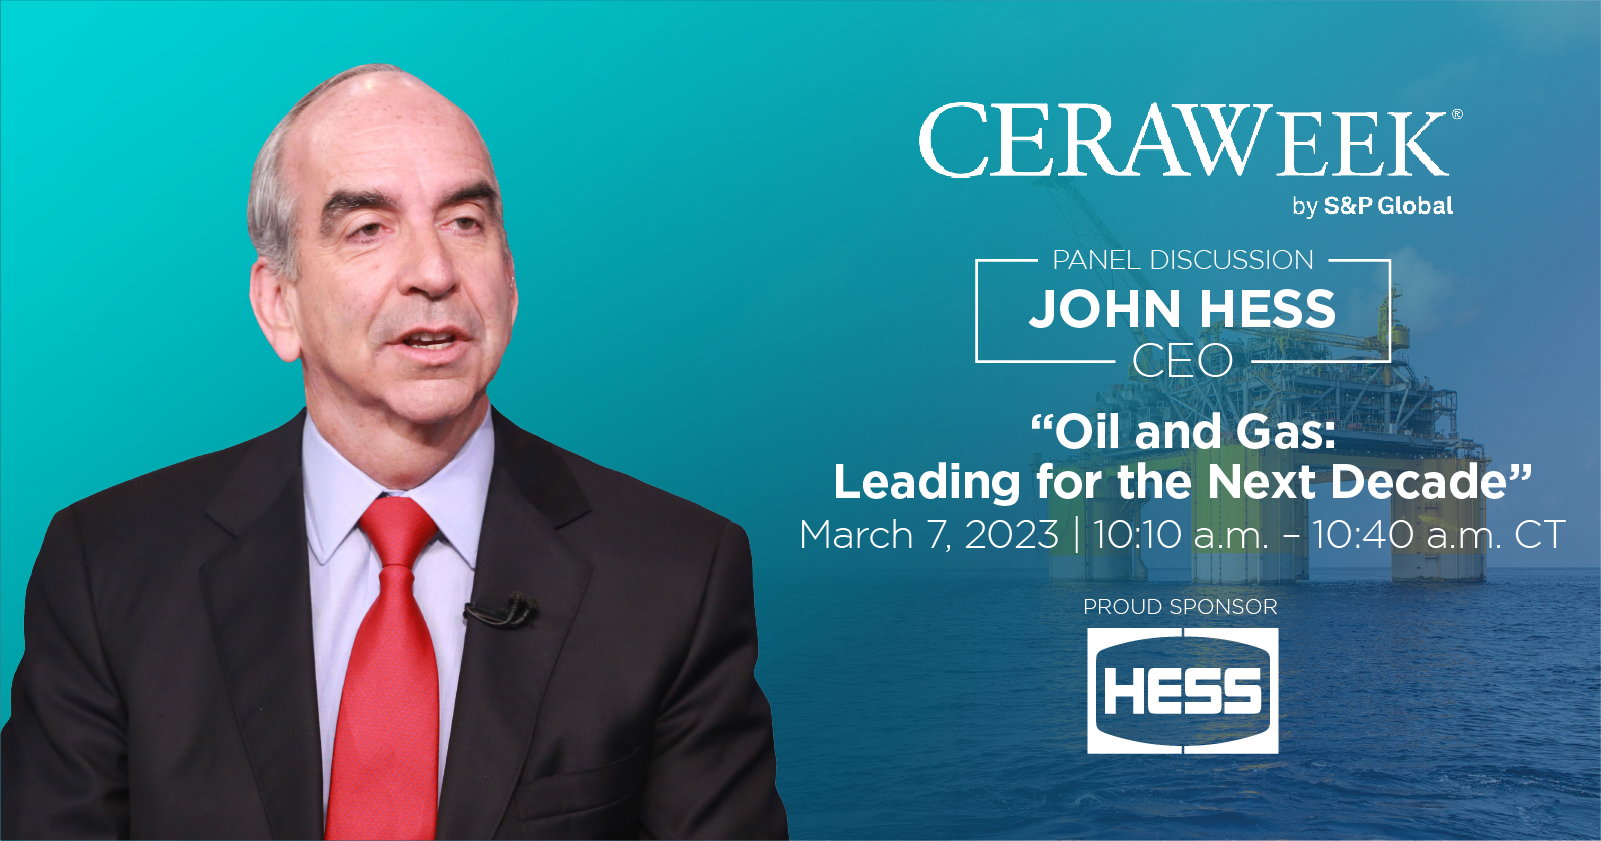 CEO John Hess Joins Panel Discussion at CERAWeek 2023